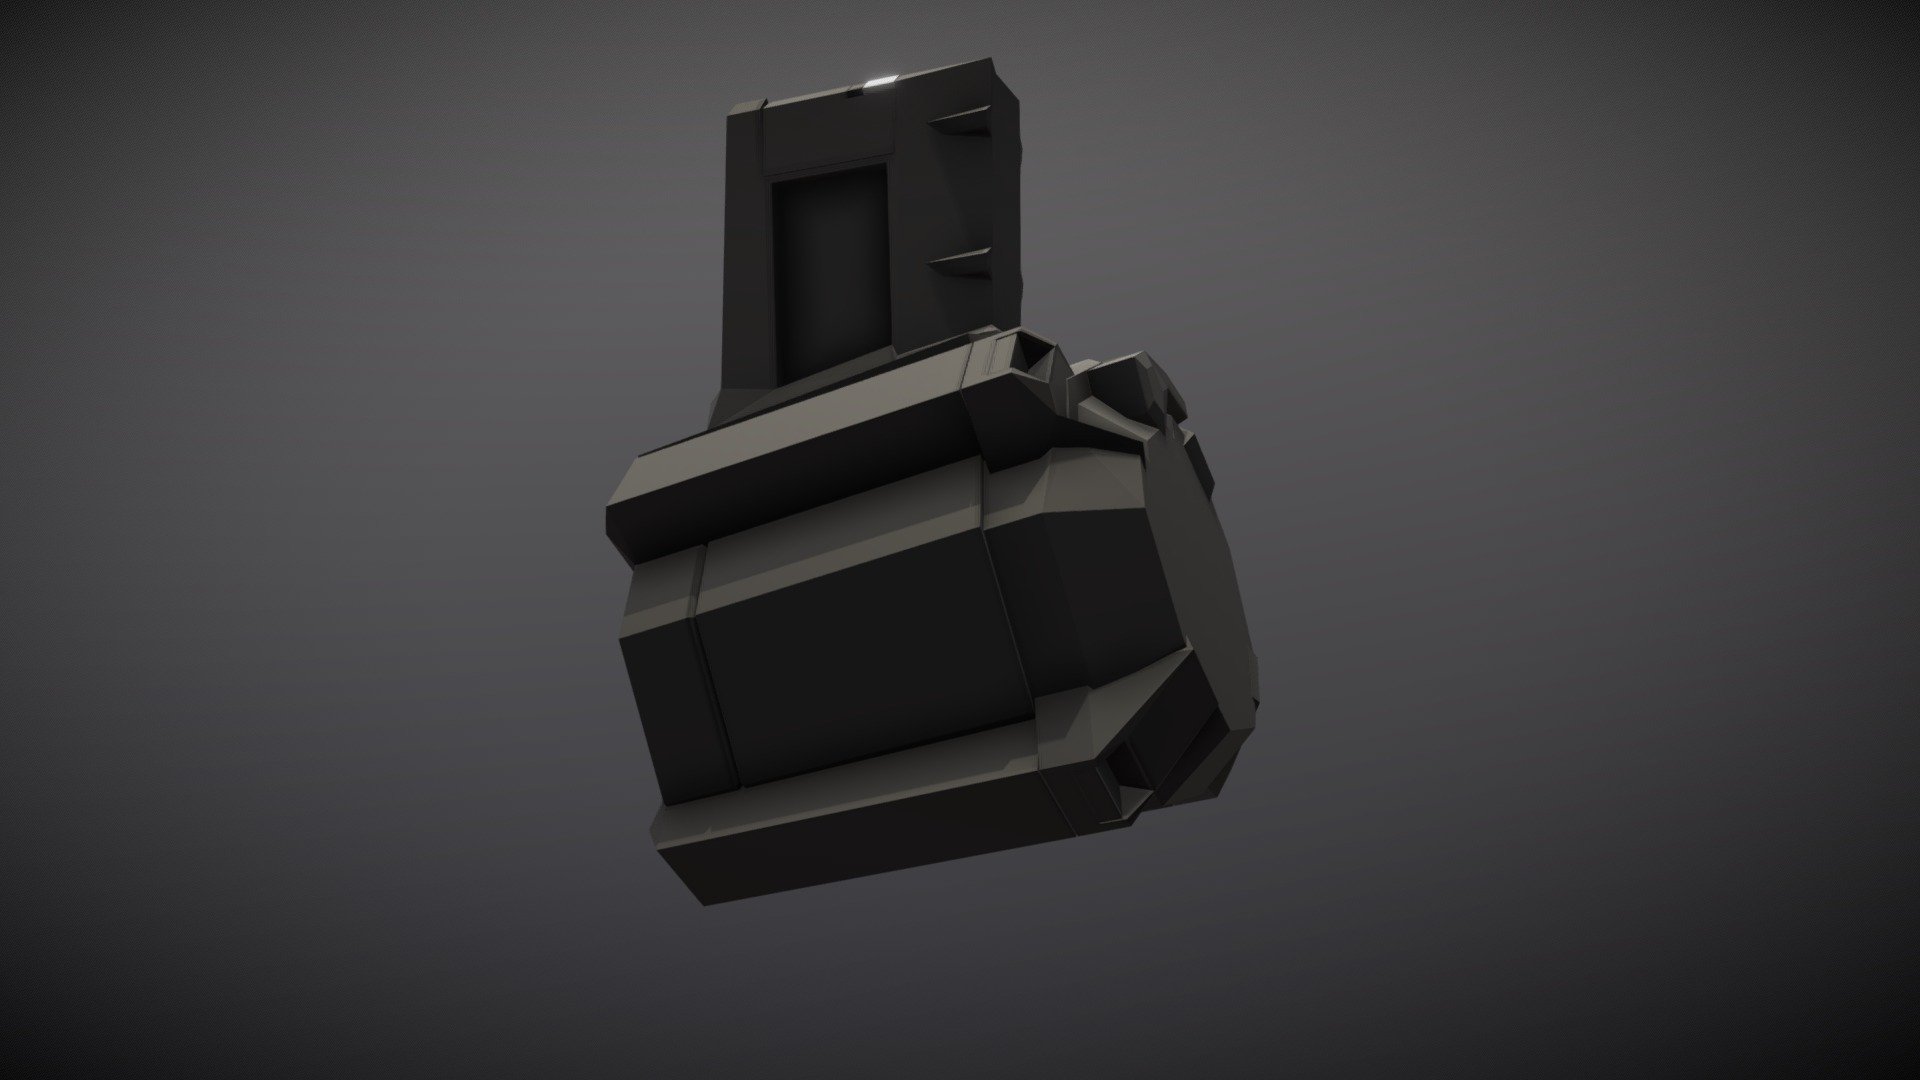 Low-Poly model of the Magpul PMAG D-50 LR/SR, a 50 round drum magazine for the SCAR-H and the AR-10, feeding 7.62x51NATO 3d model